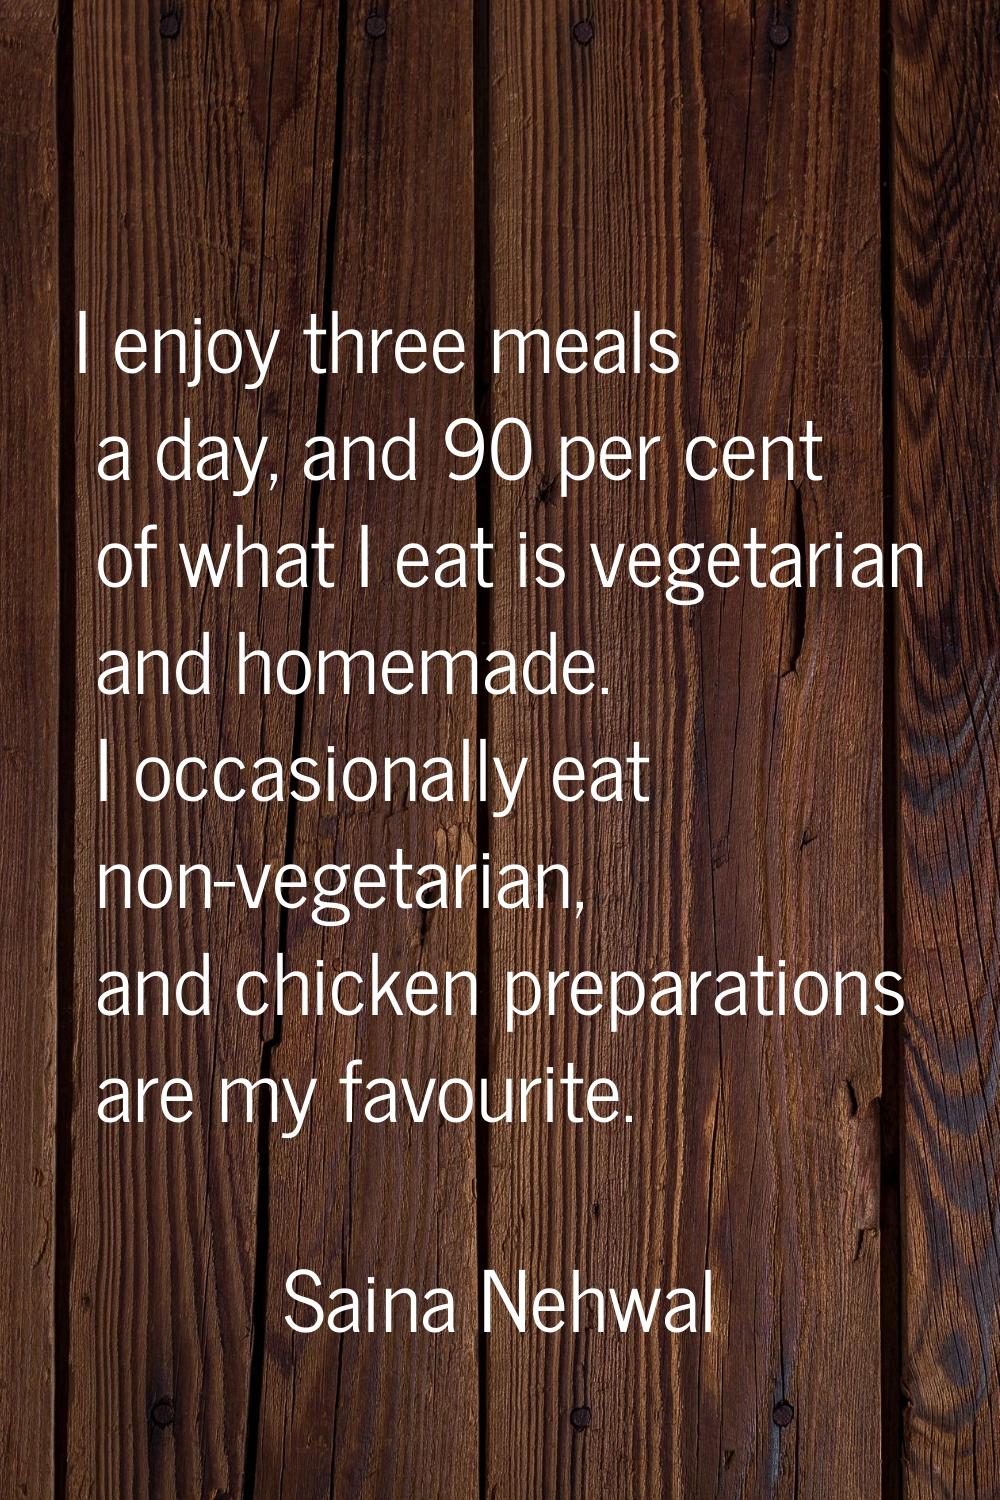 I enjoy three meals a day, and 90 per cent of what I eat is vegetarian and homemade. I occasionally